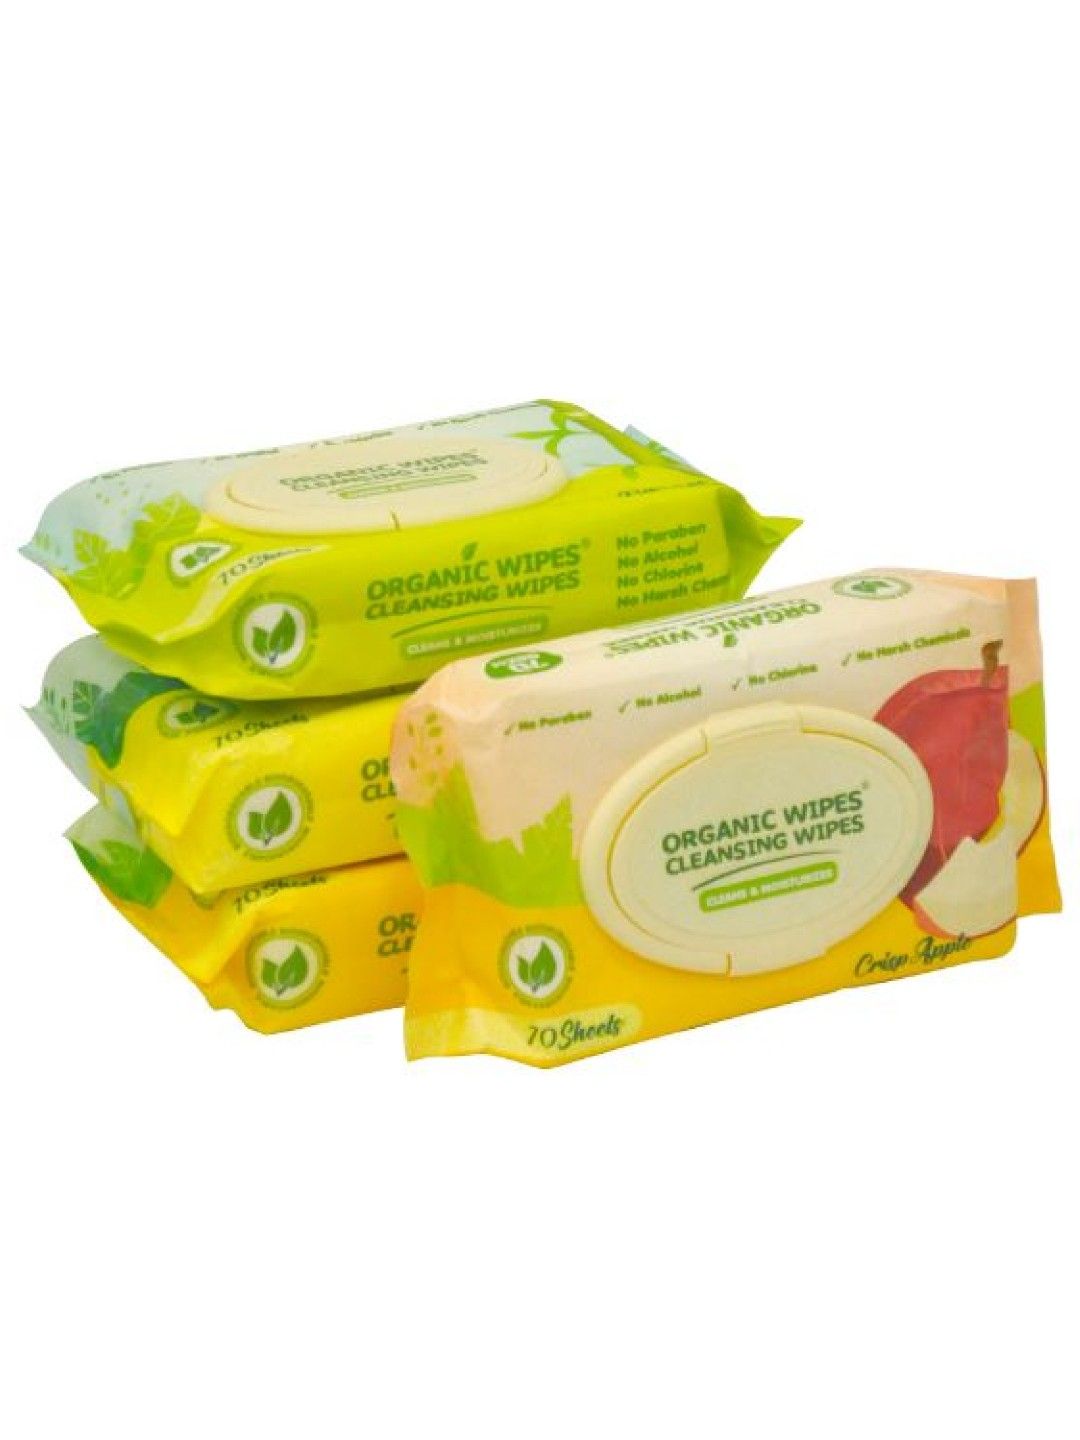 Organic Baby Wipes Organic Wipes Cleansing Wipes Assorted (70s x 4-pack)